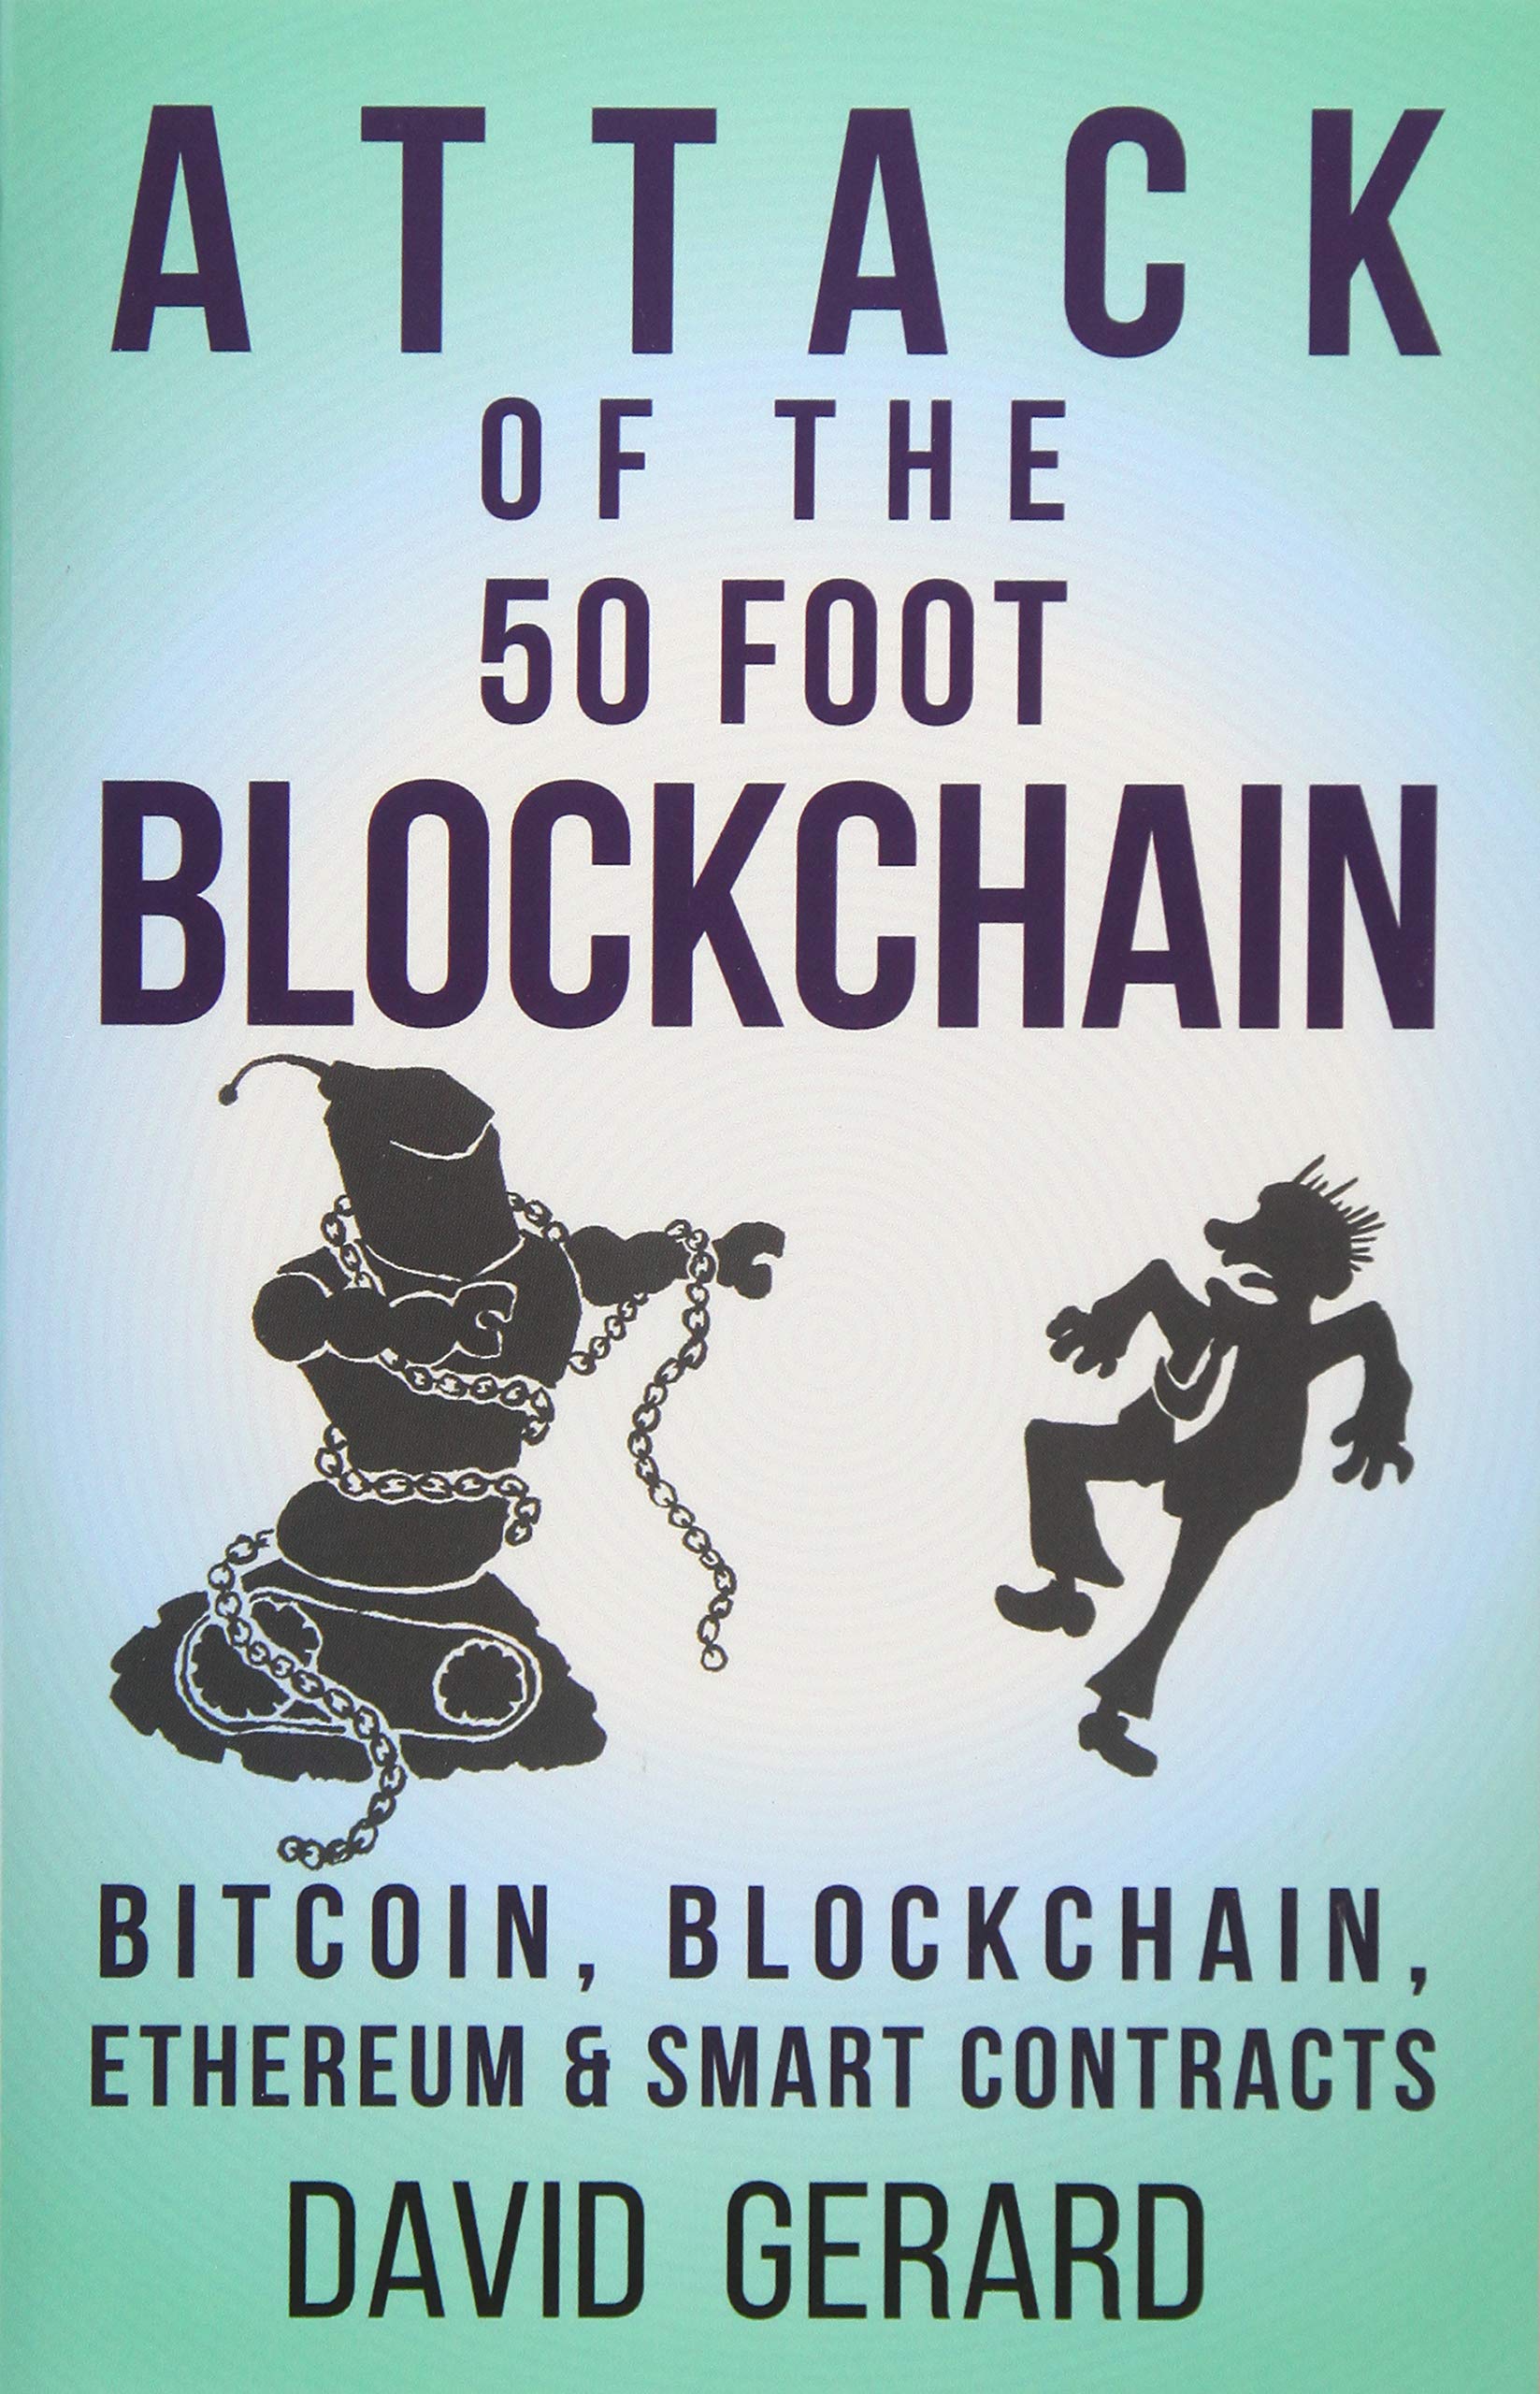 best book for trading cryptocurrency